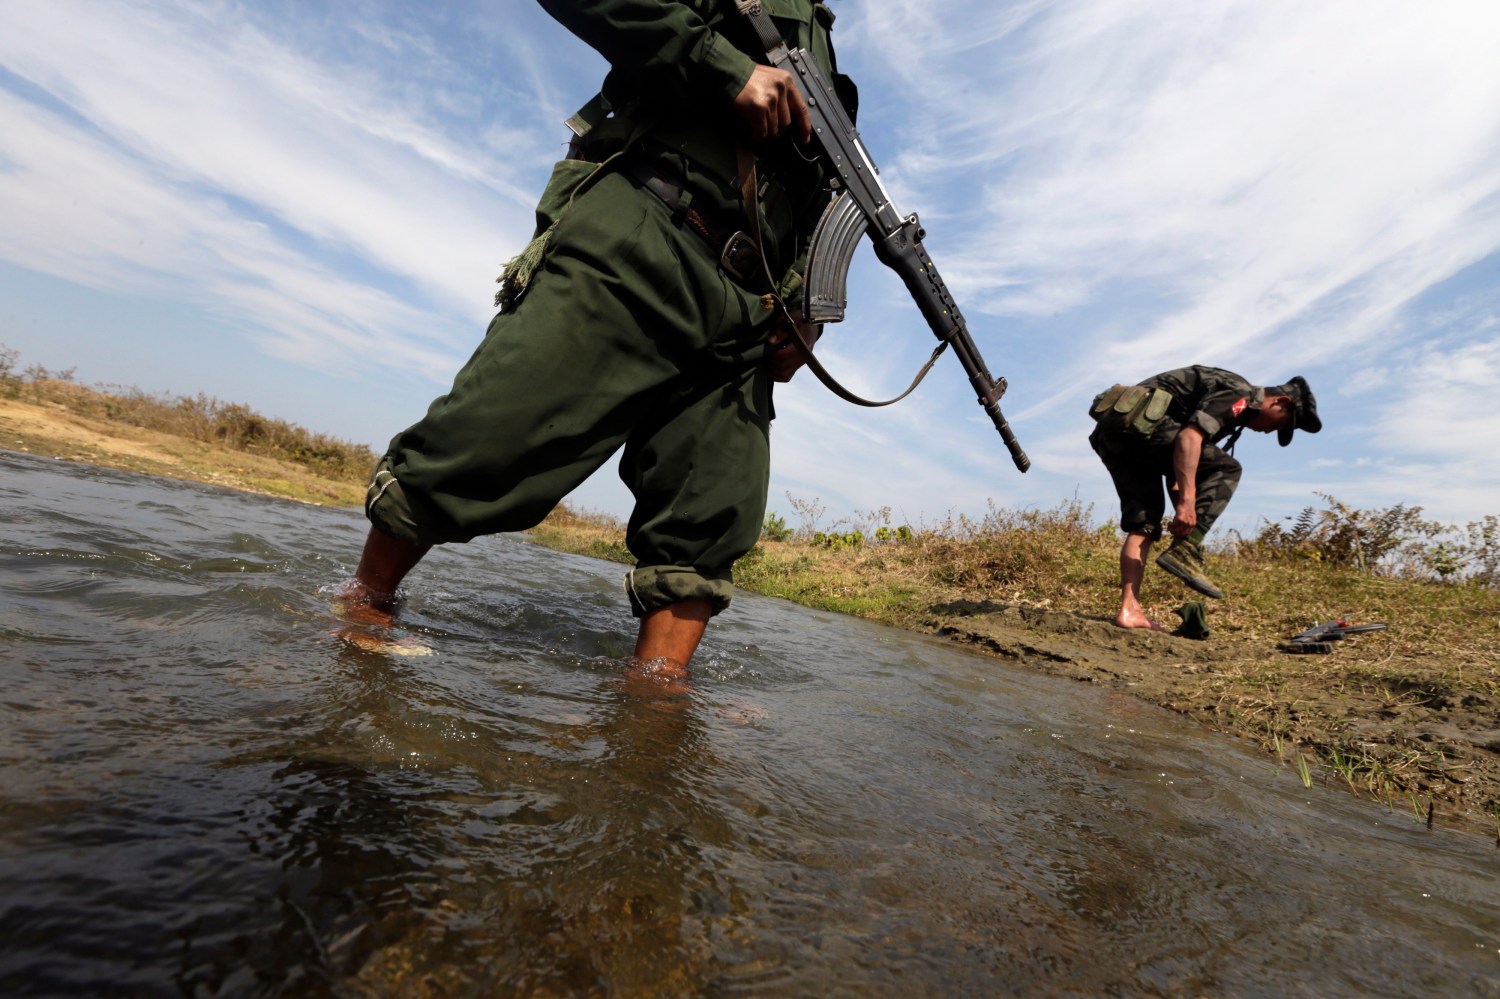 A soldier from the Kachin Independence Army (KIA) puts on his shoes as he and his comrade cross a stream towards the front line in Laiza, Kachin state, January 29, 2013. Myanmar's government started talks with top commanders of the KIA rebel group in China on February 4, 2013 to try to rescue a faltering peace process and end one of the country's bloodiest ethnic conflicts. KIA is fighting for autonomy for Kachin state within a federal Myanmar, which successive governments of the ethnically diverse country have long rejected. Picture taken January 29, 2013. REUTERS/David Johnson